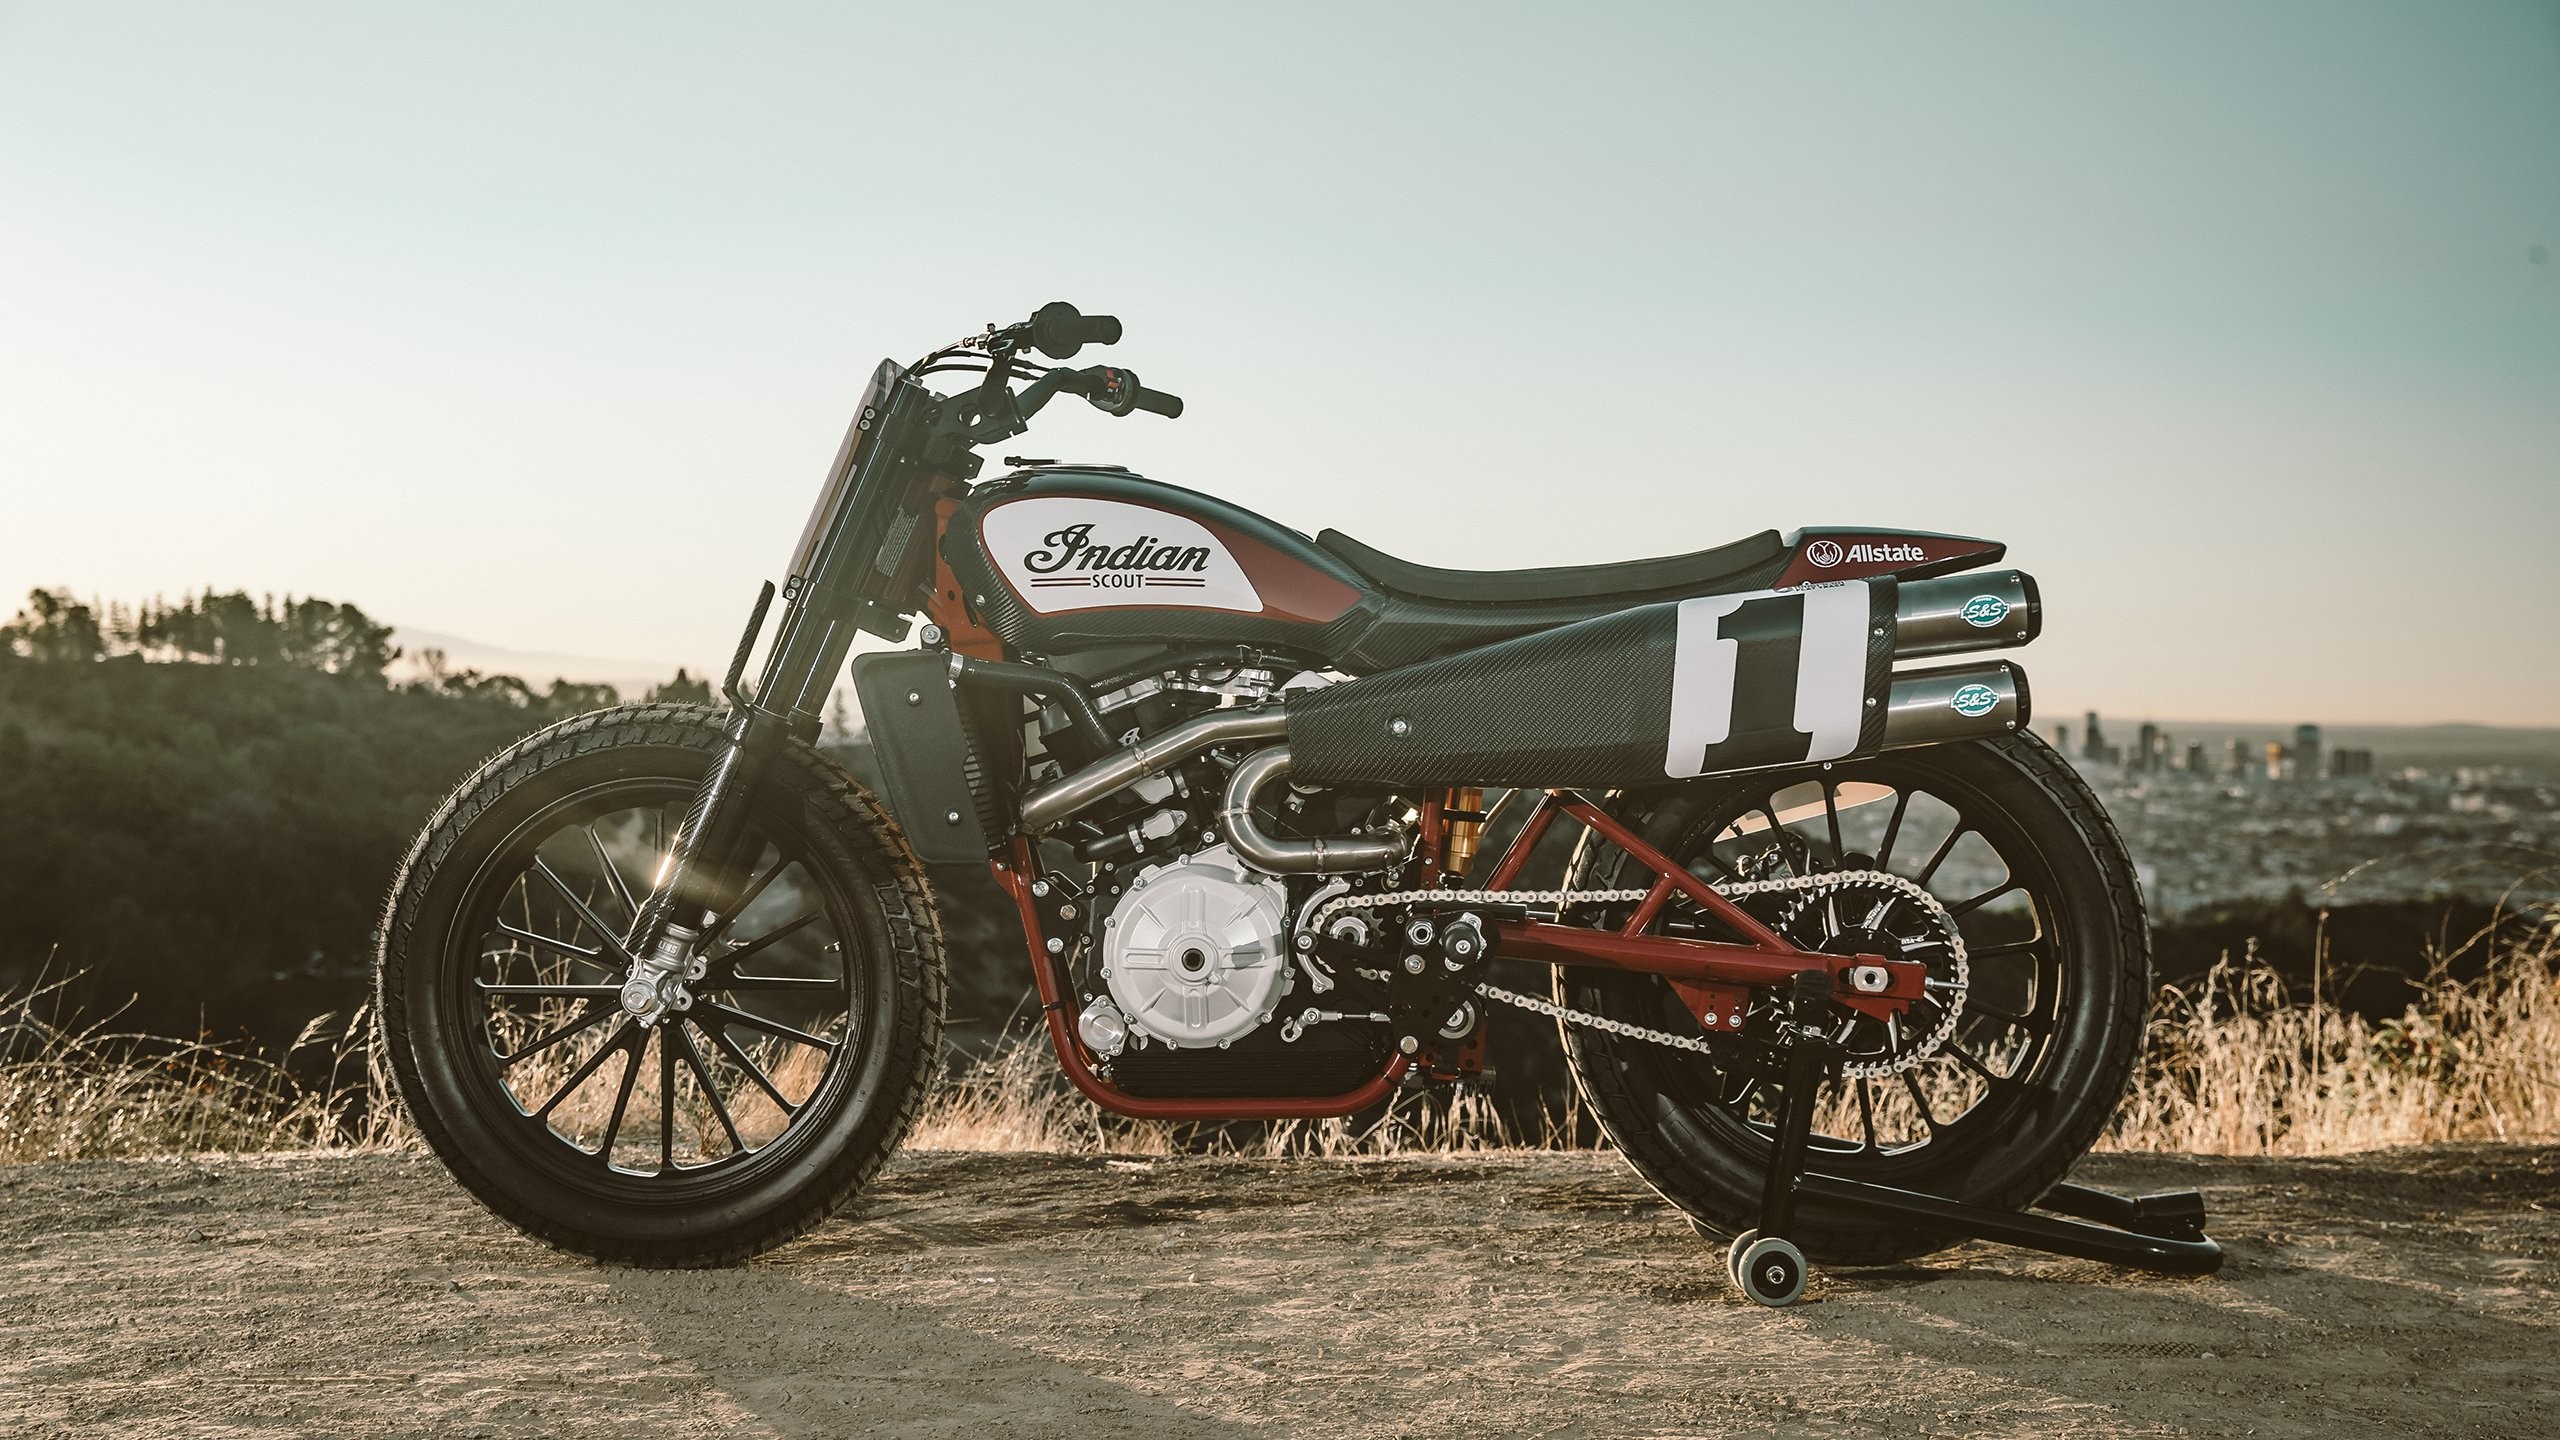 2560x1440 2018-indian-scout-ftr1200-15